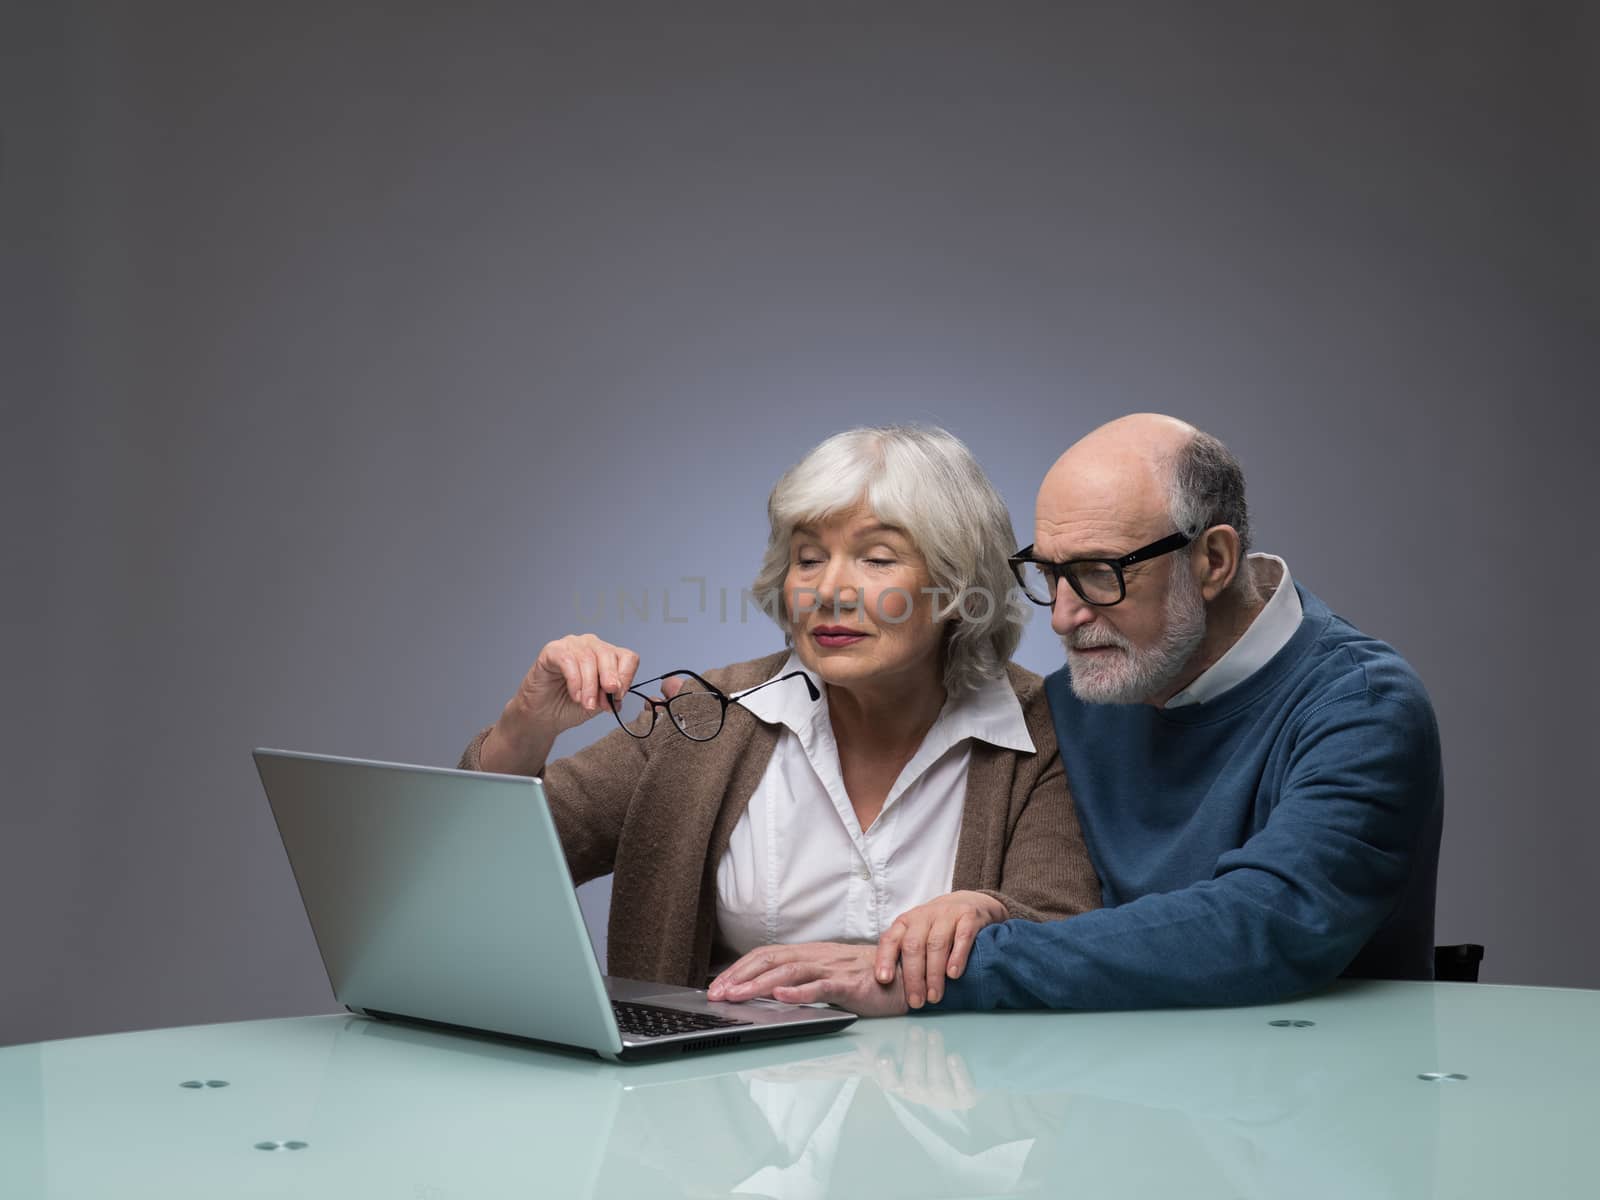 Ssenior couple looking at a laptop together, studio shot on gray background with copy space